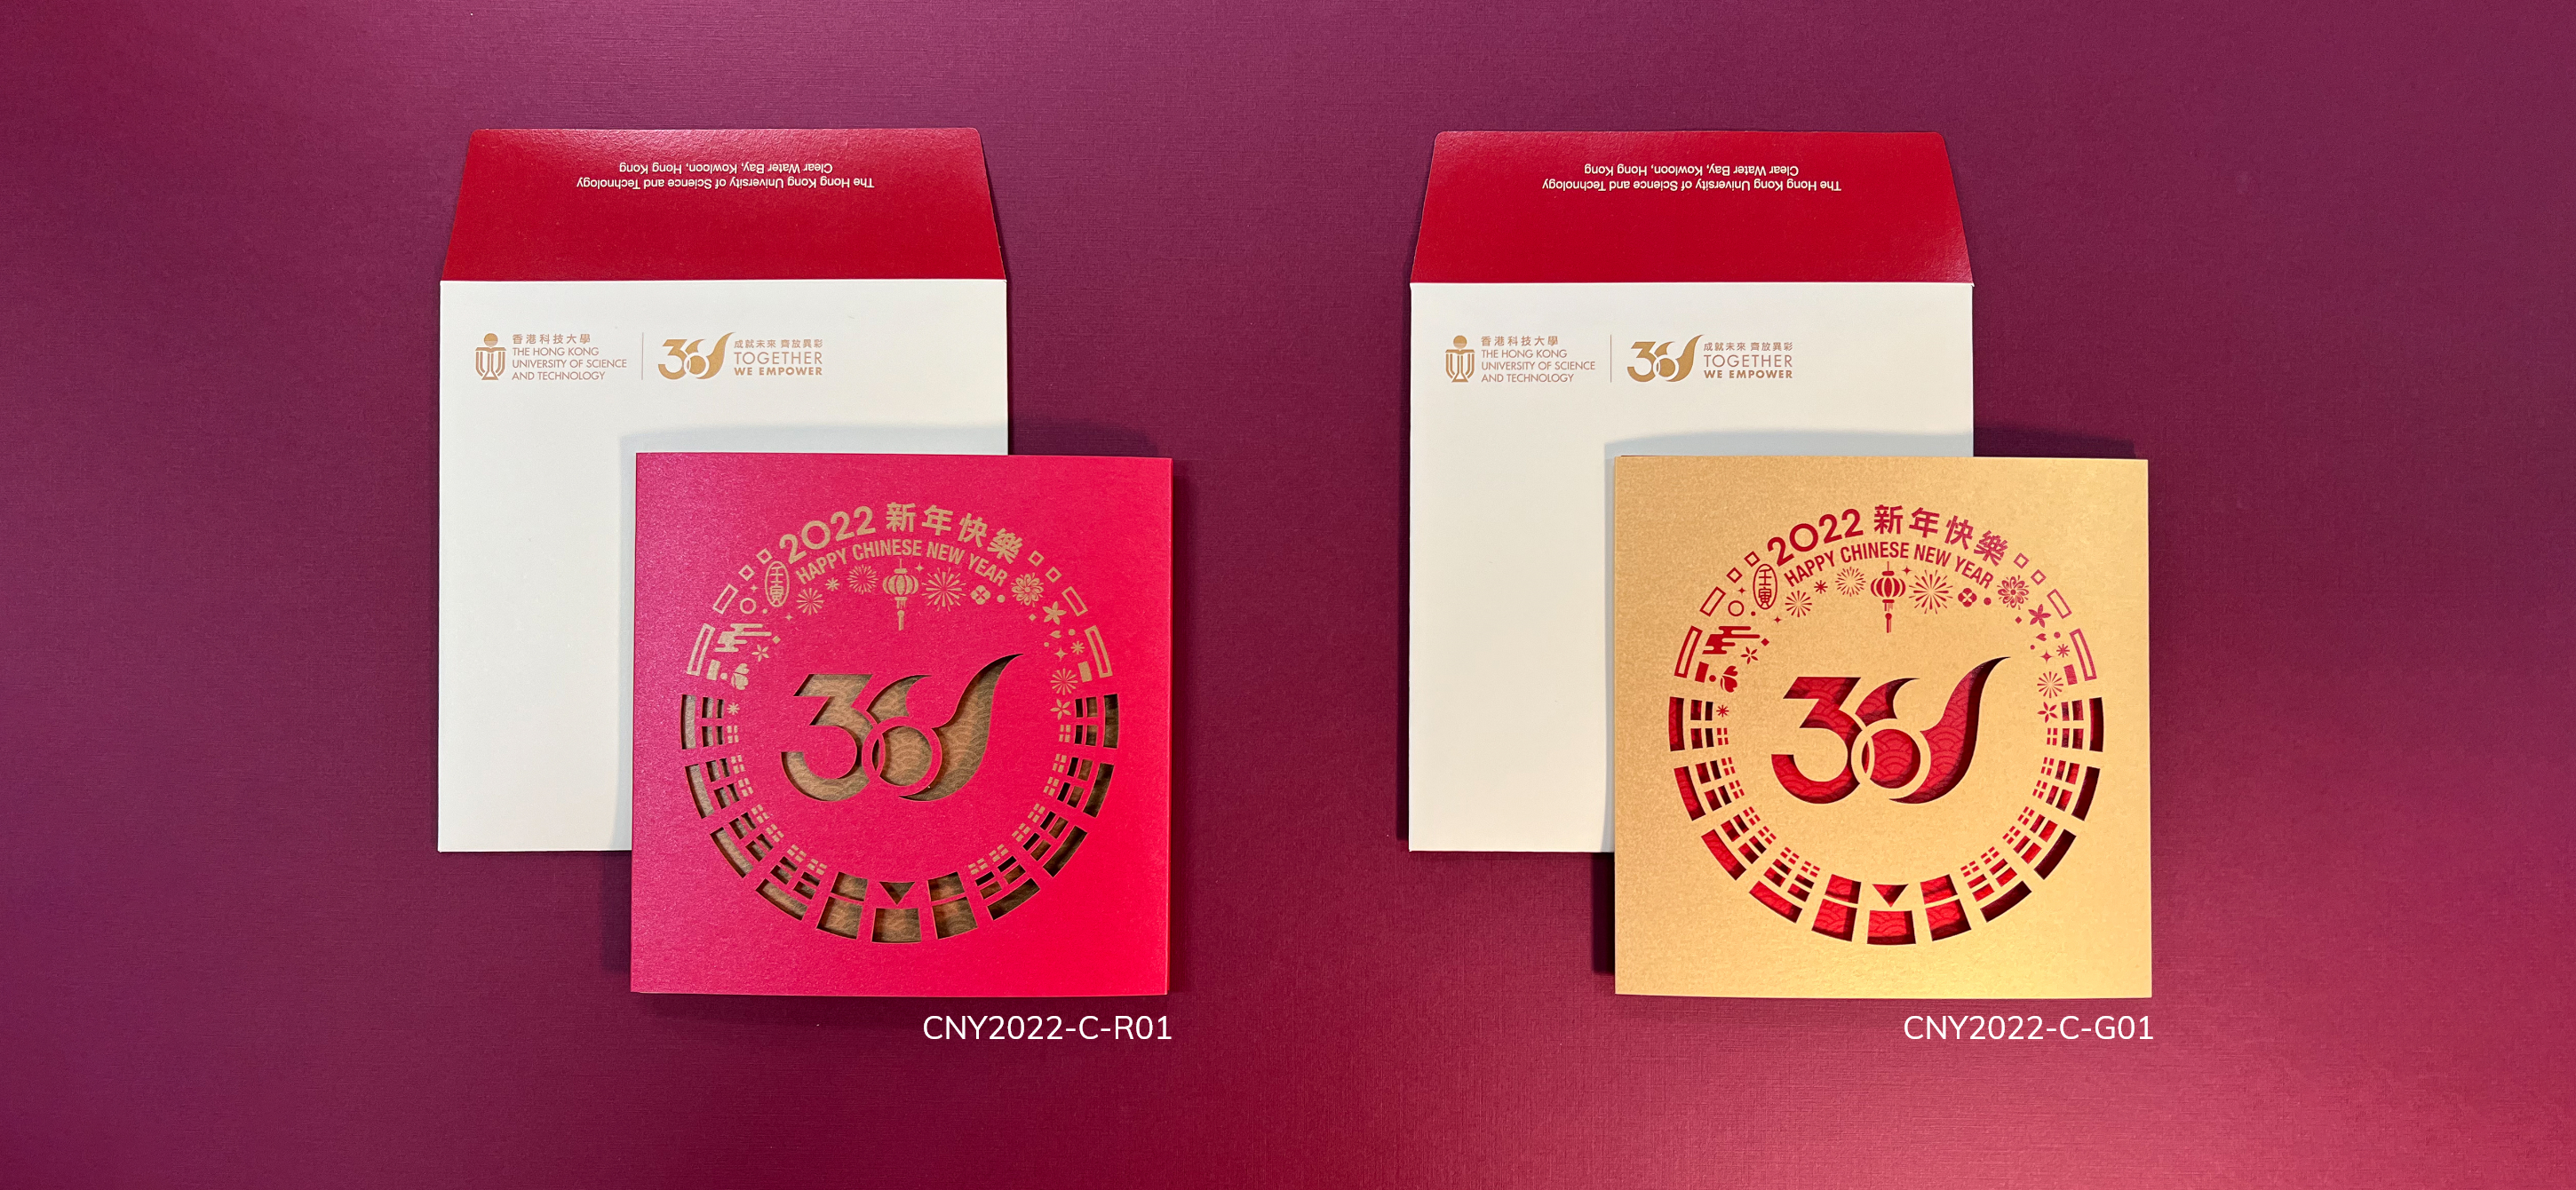 Chinese New Year Greeting Card - 30th Anniversary Edition